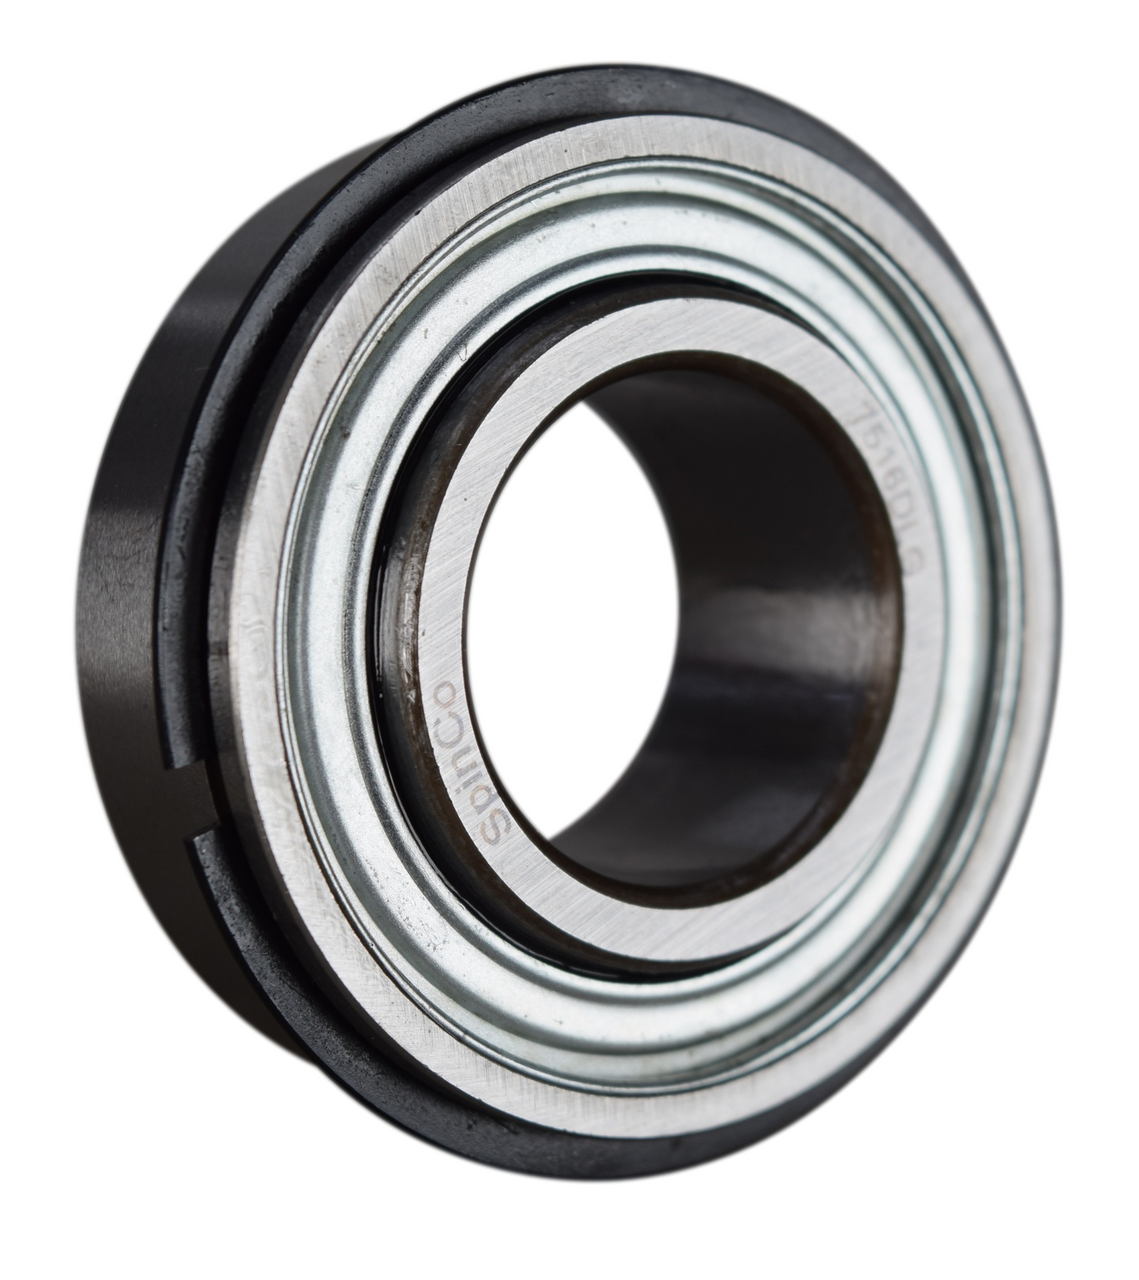 7514DLG GENERIC 0.875x2x0.625/0.75 Normal duty bearing insert with a parallel outer race with snap ring and groove - Imperial Thumbnail